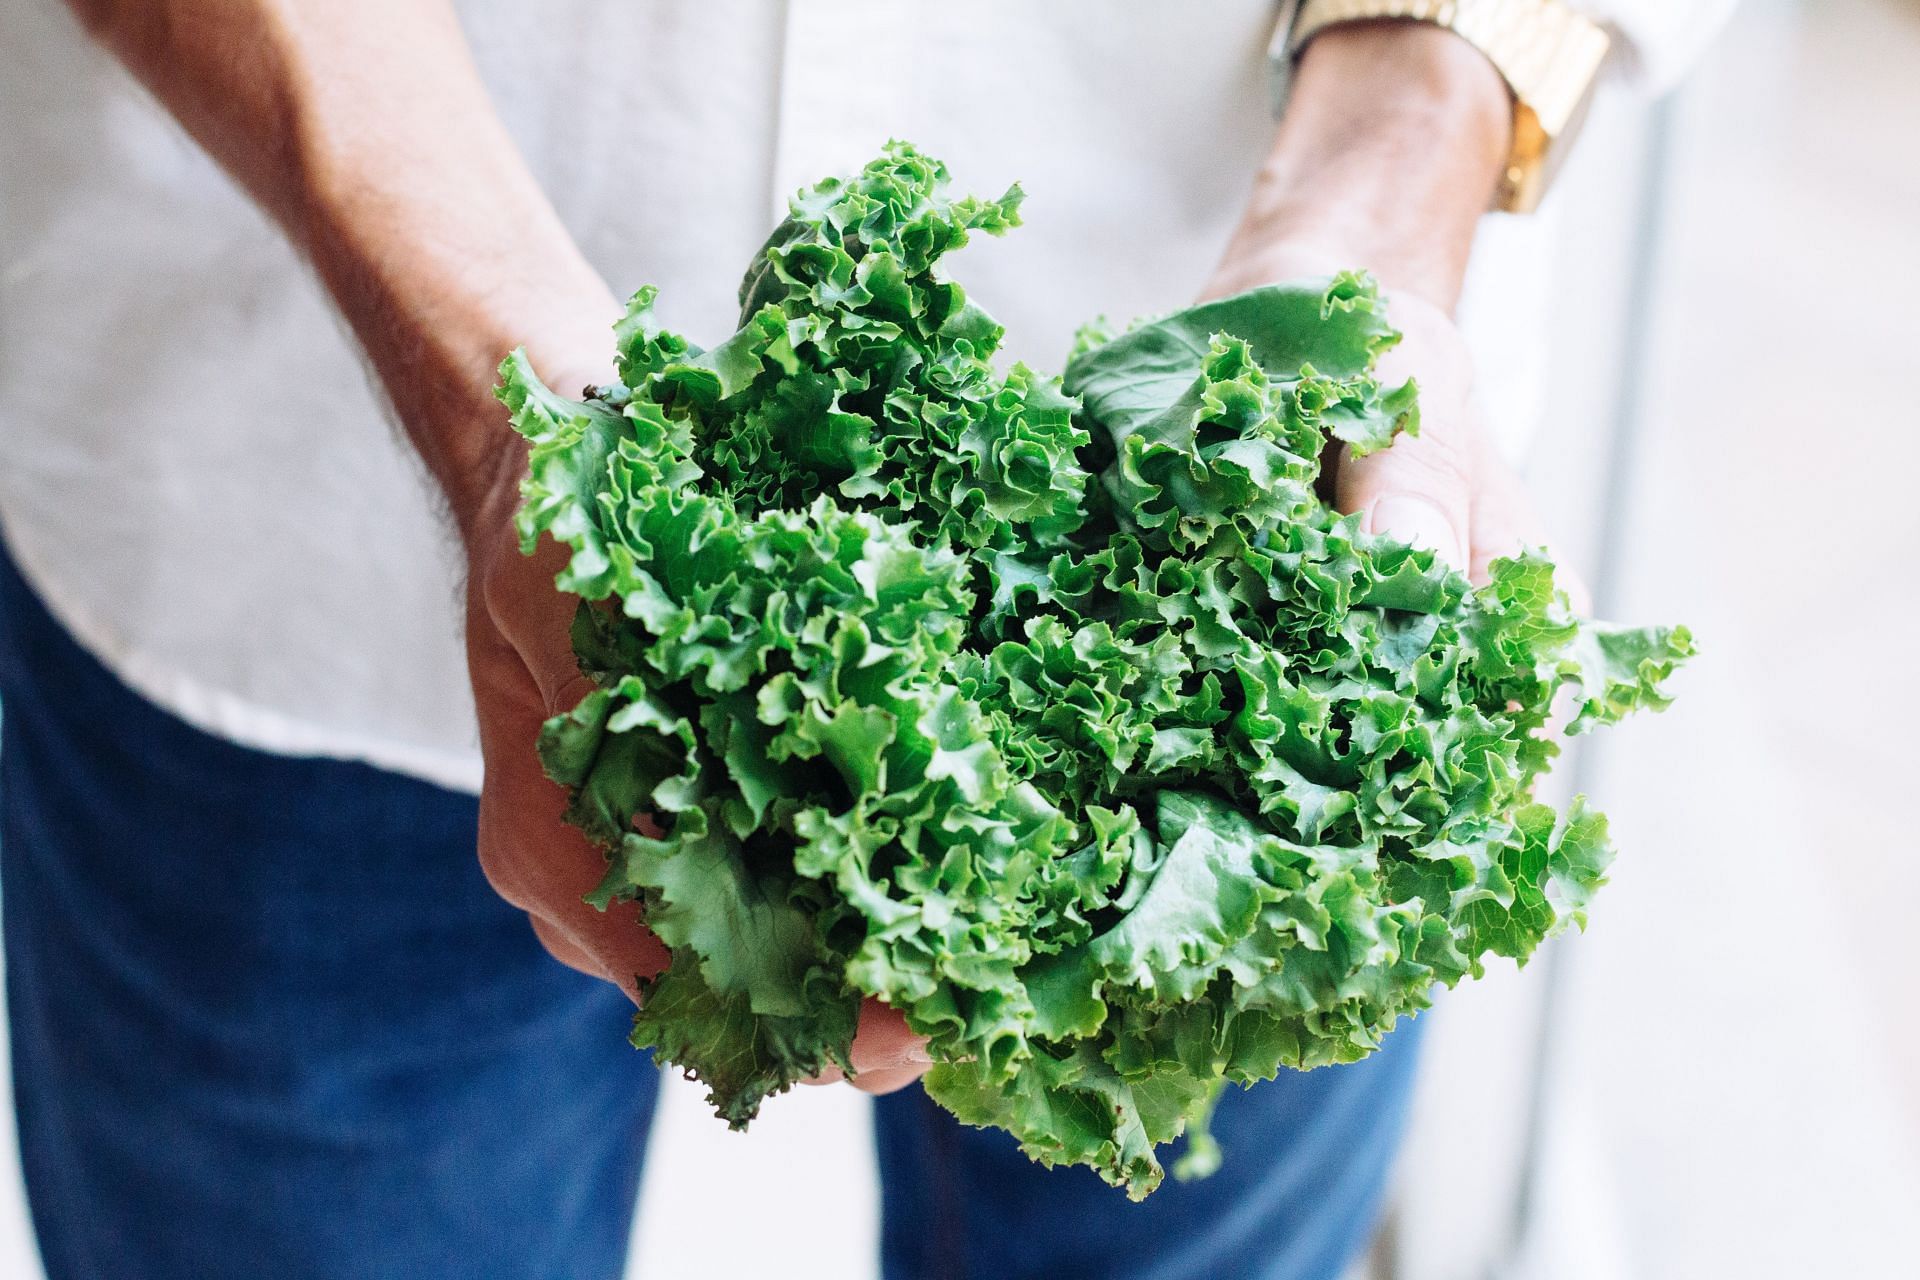 Is kale bad for you? Pros and cons of the popular health food